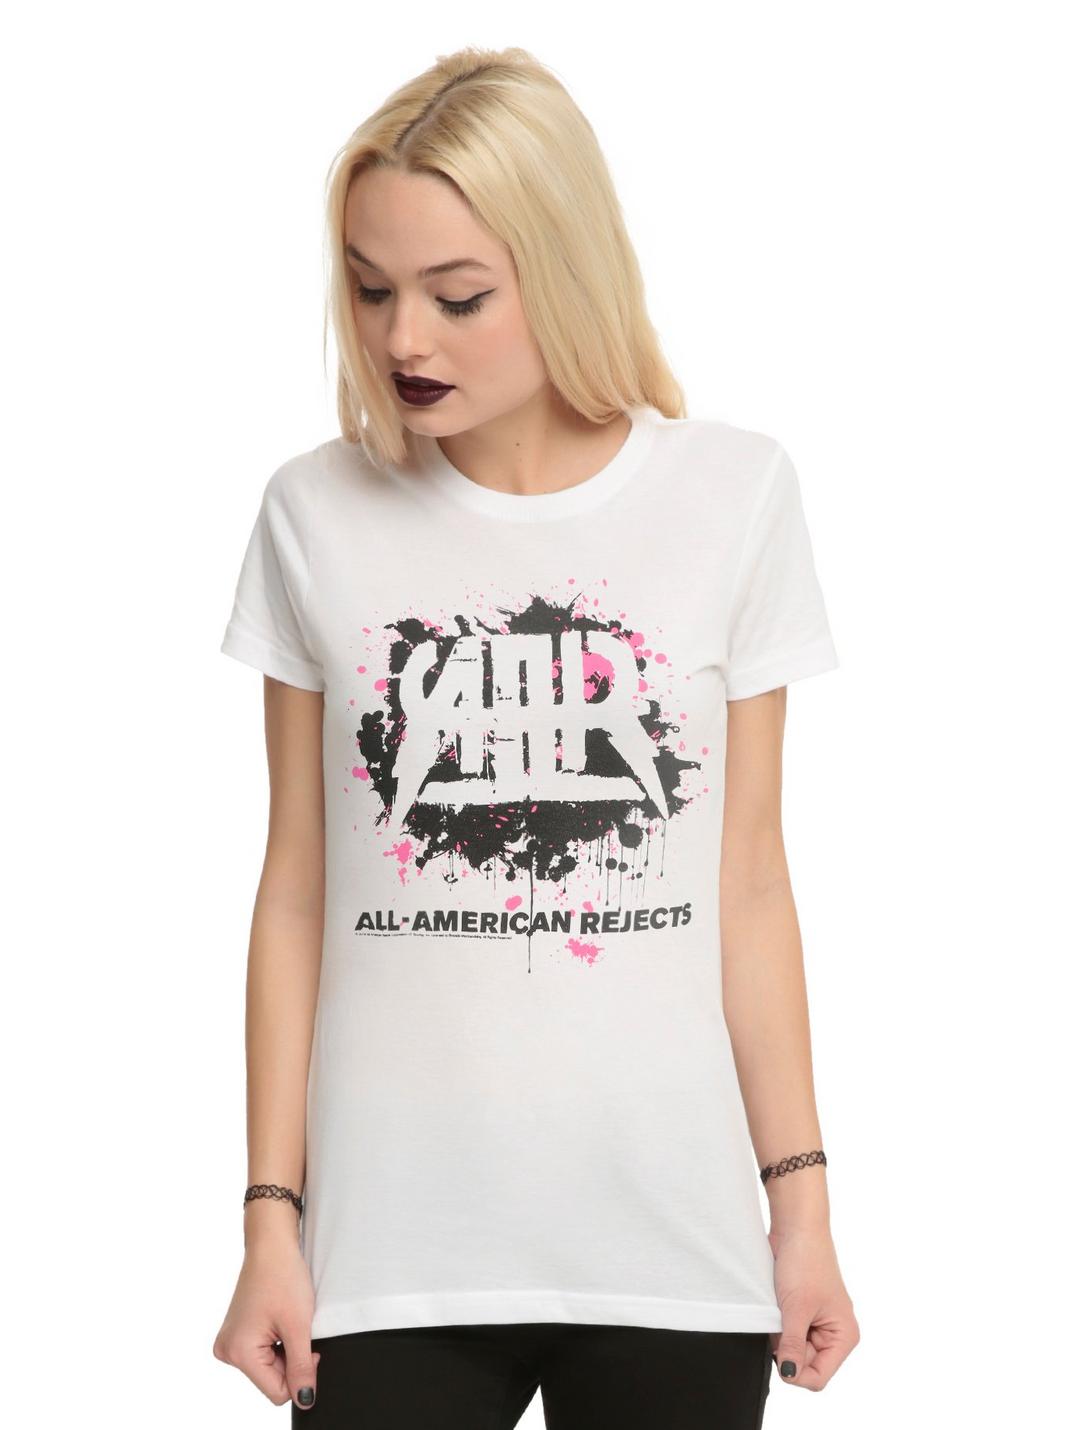 The All-American Rejects Splatter Logo Girls T-Shirt, WHITE, hi-res